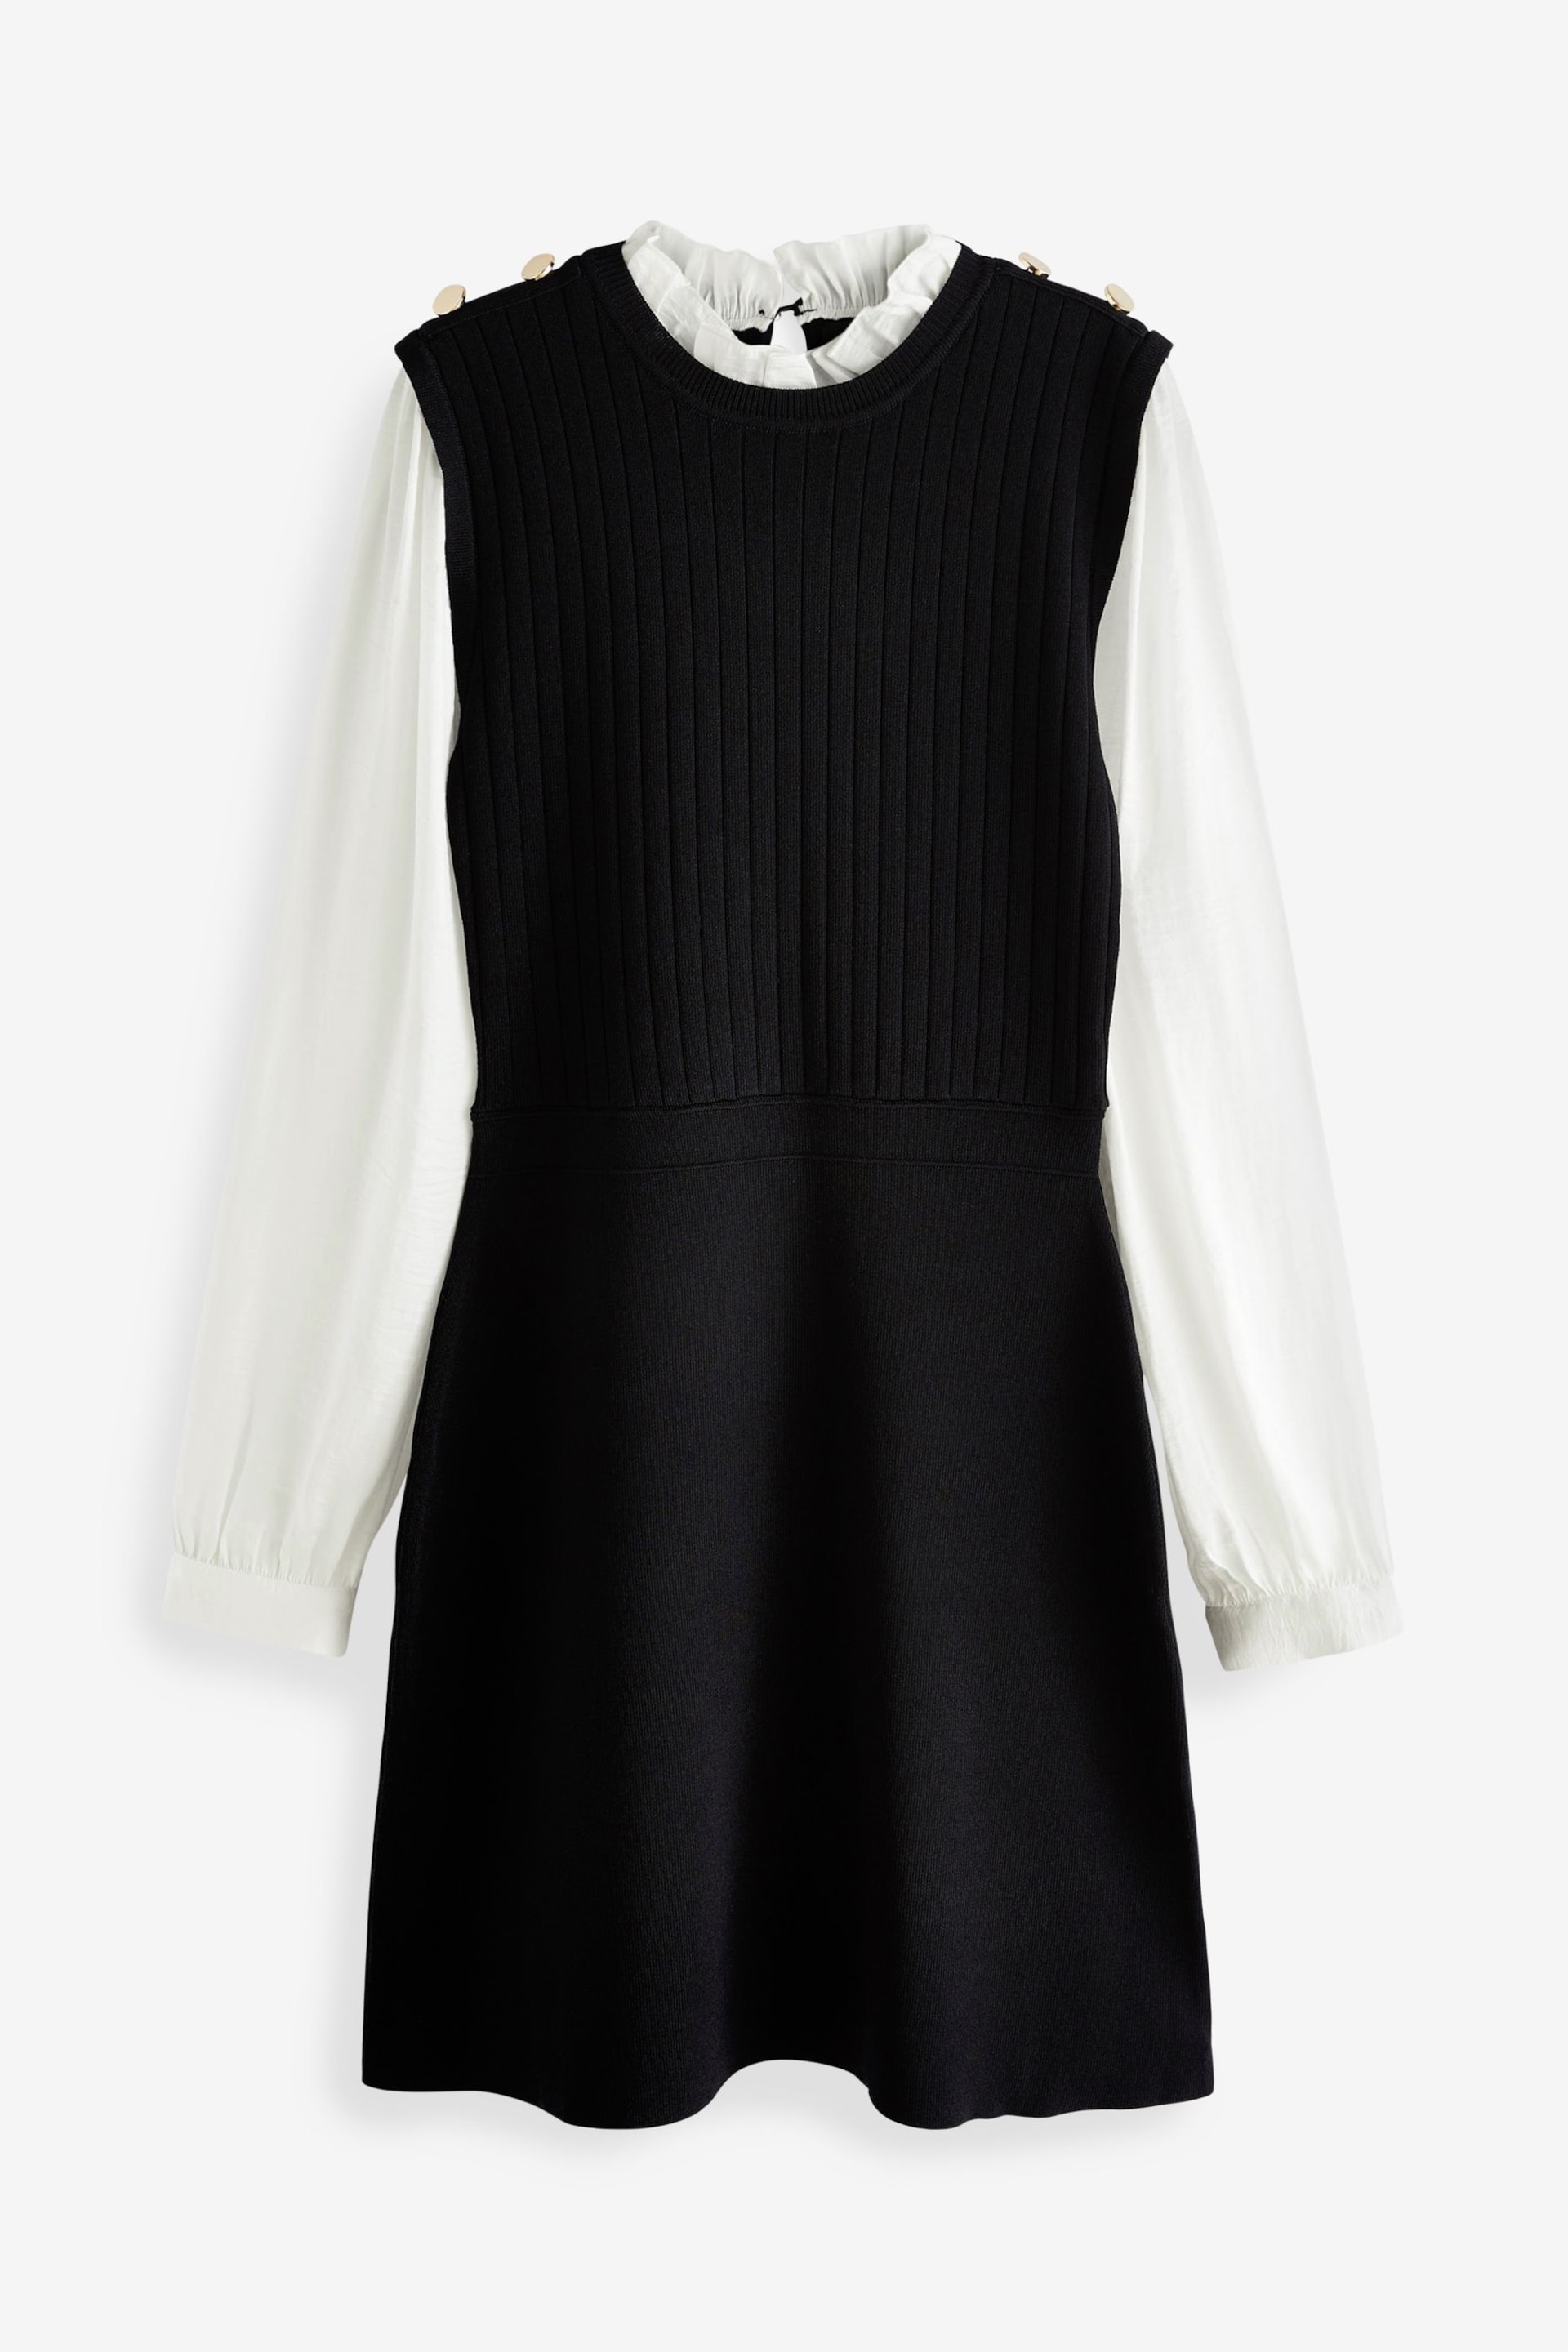 Black Knitted Pinafore Layer Dress - Image 5 of 6